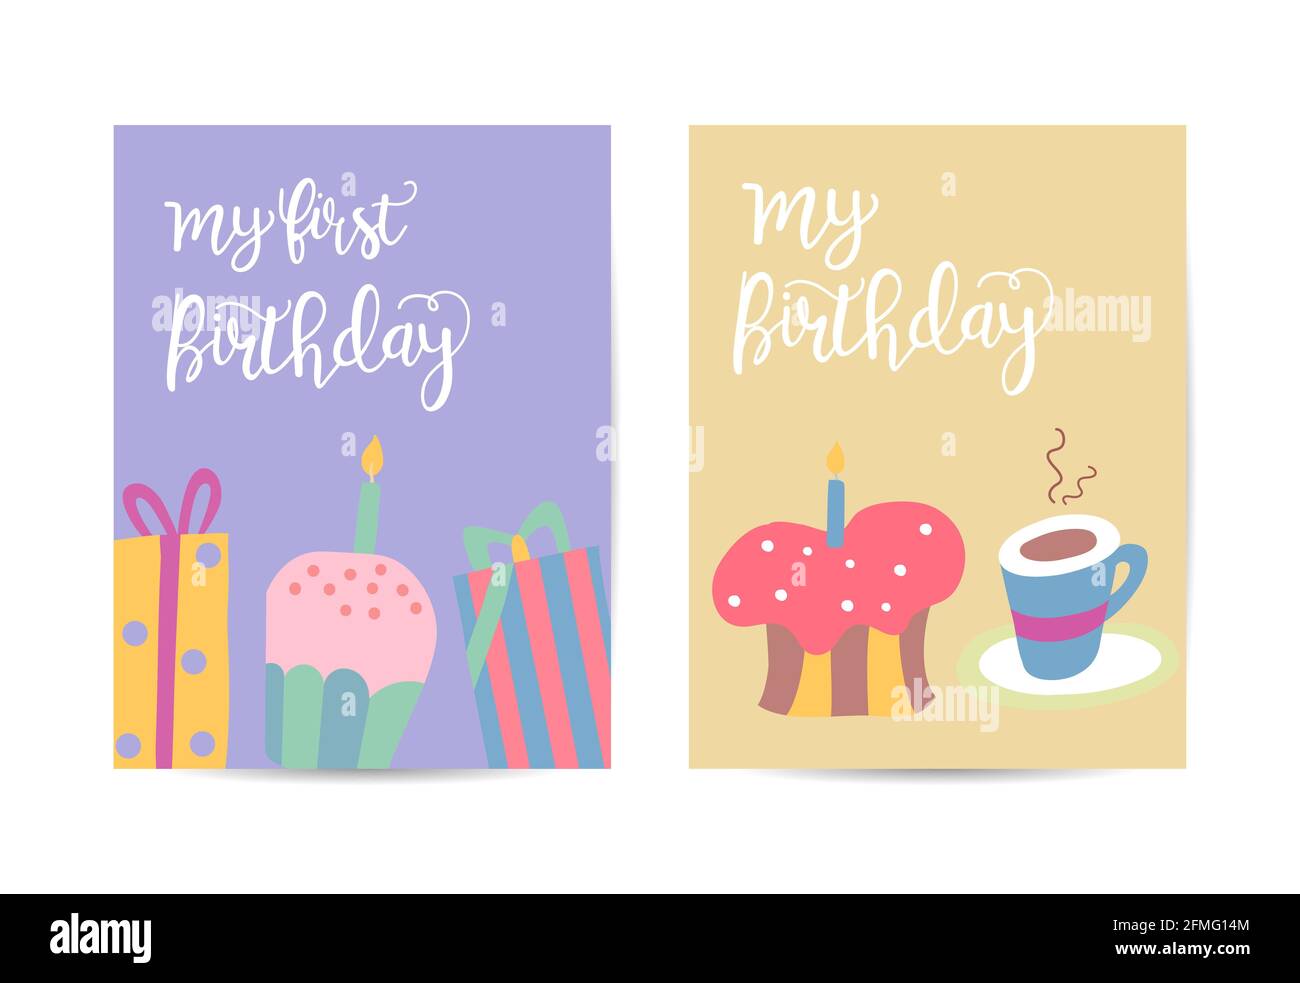 Happy birthday greeting card. Lovely birthday Cakes with candles. Stock Vector